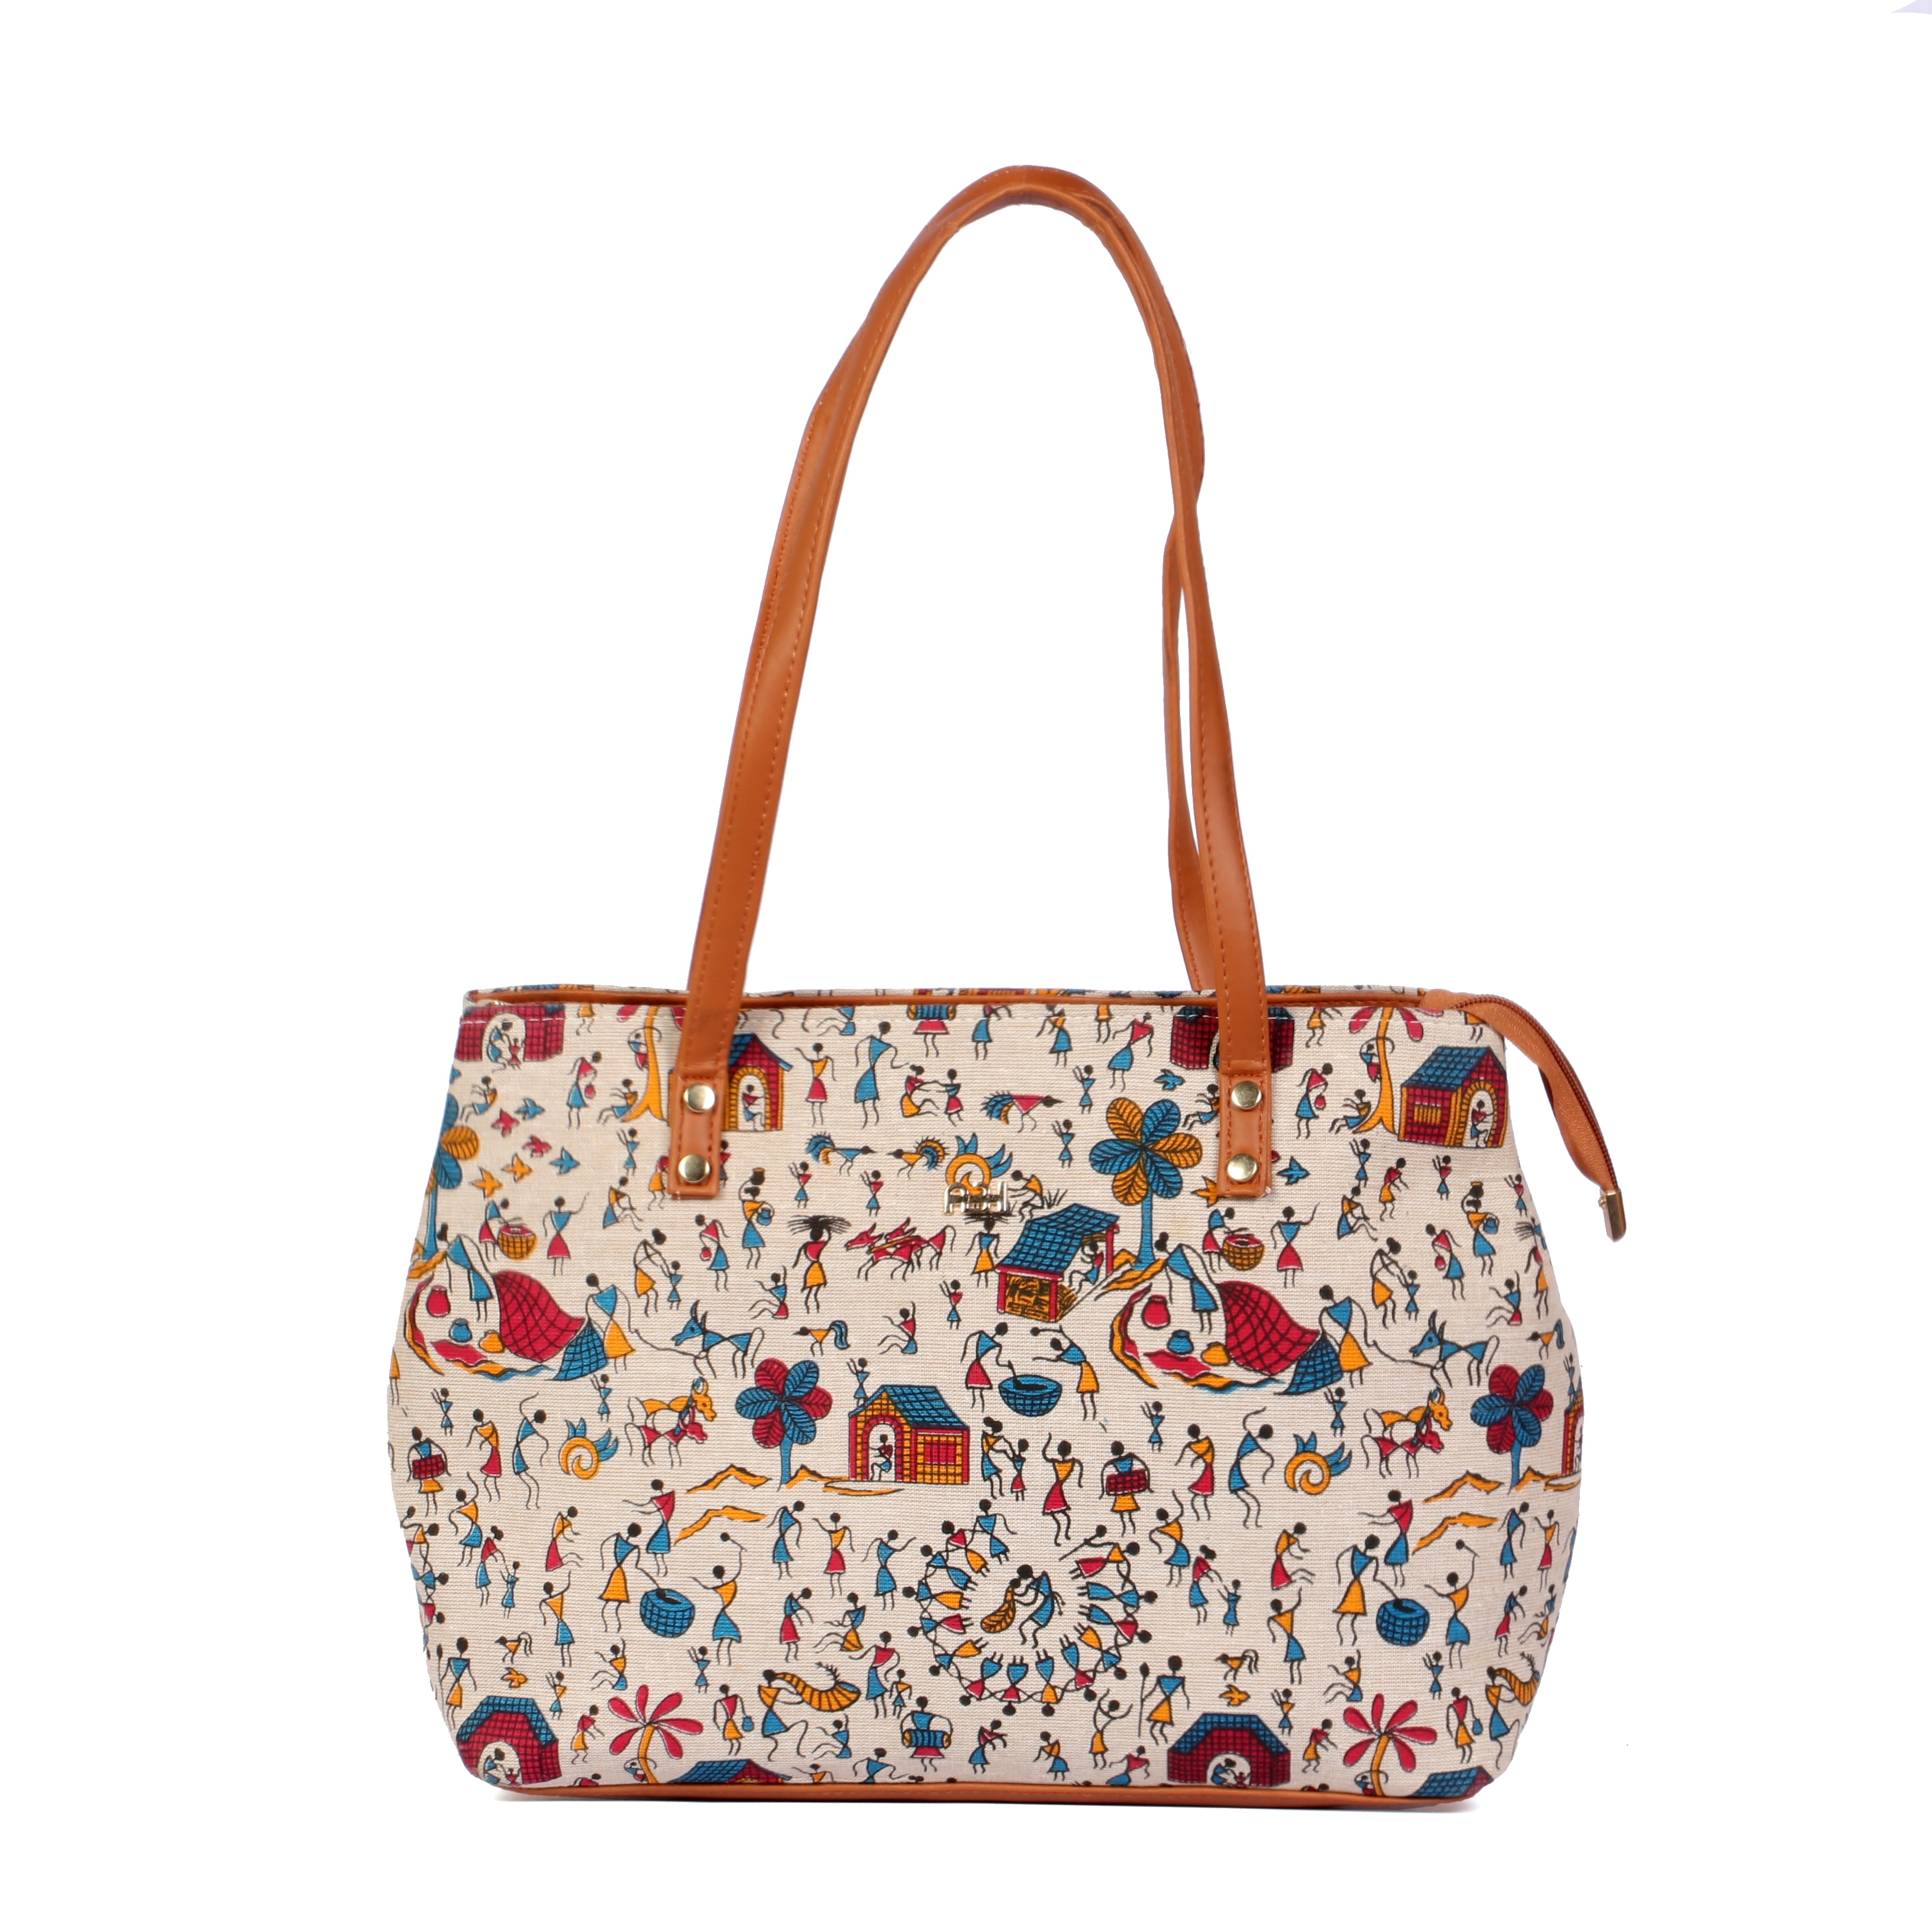 EMM | Lely's Warli Printed Leather Hand Bag For Women